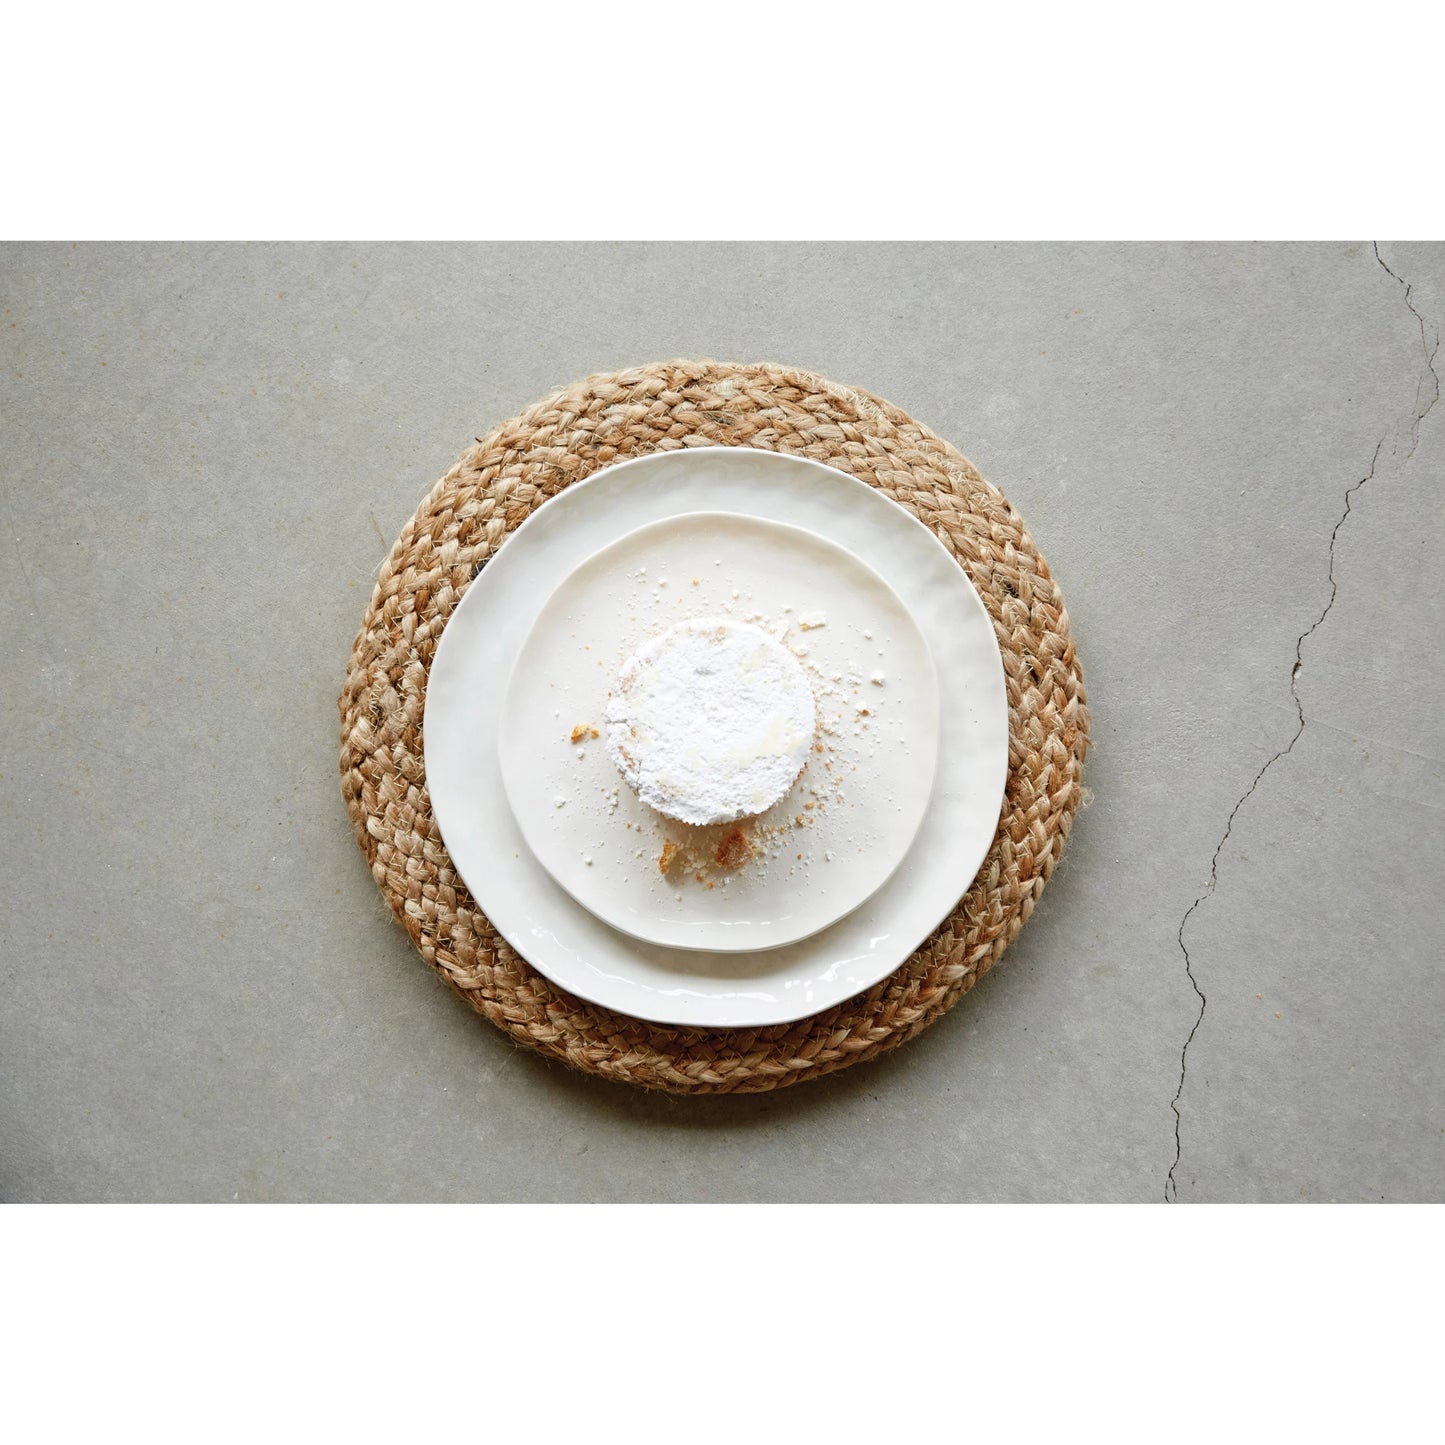 Hand-Woven Jute Placemat | 14" Round | Natural